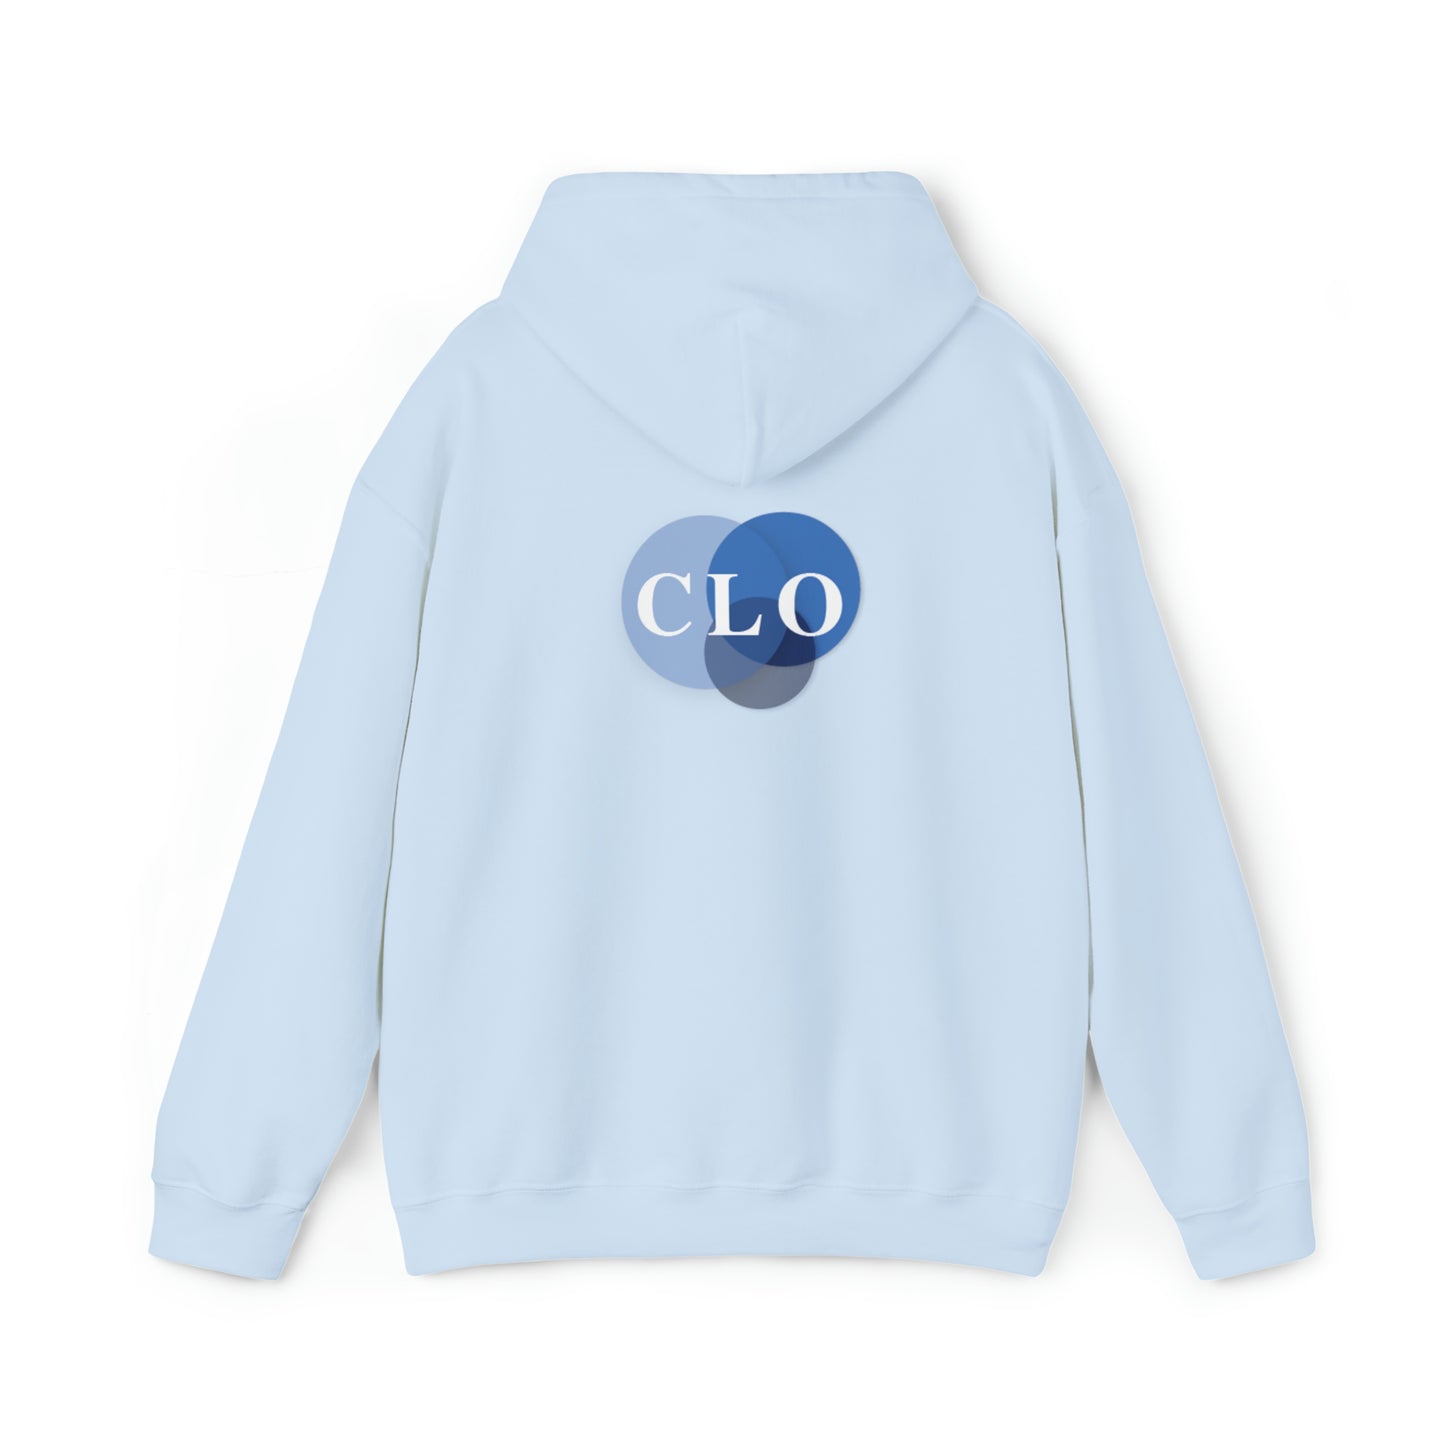 Chief Learning Officer Bubble Hooded Sweatshirt